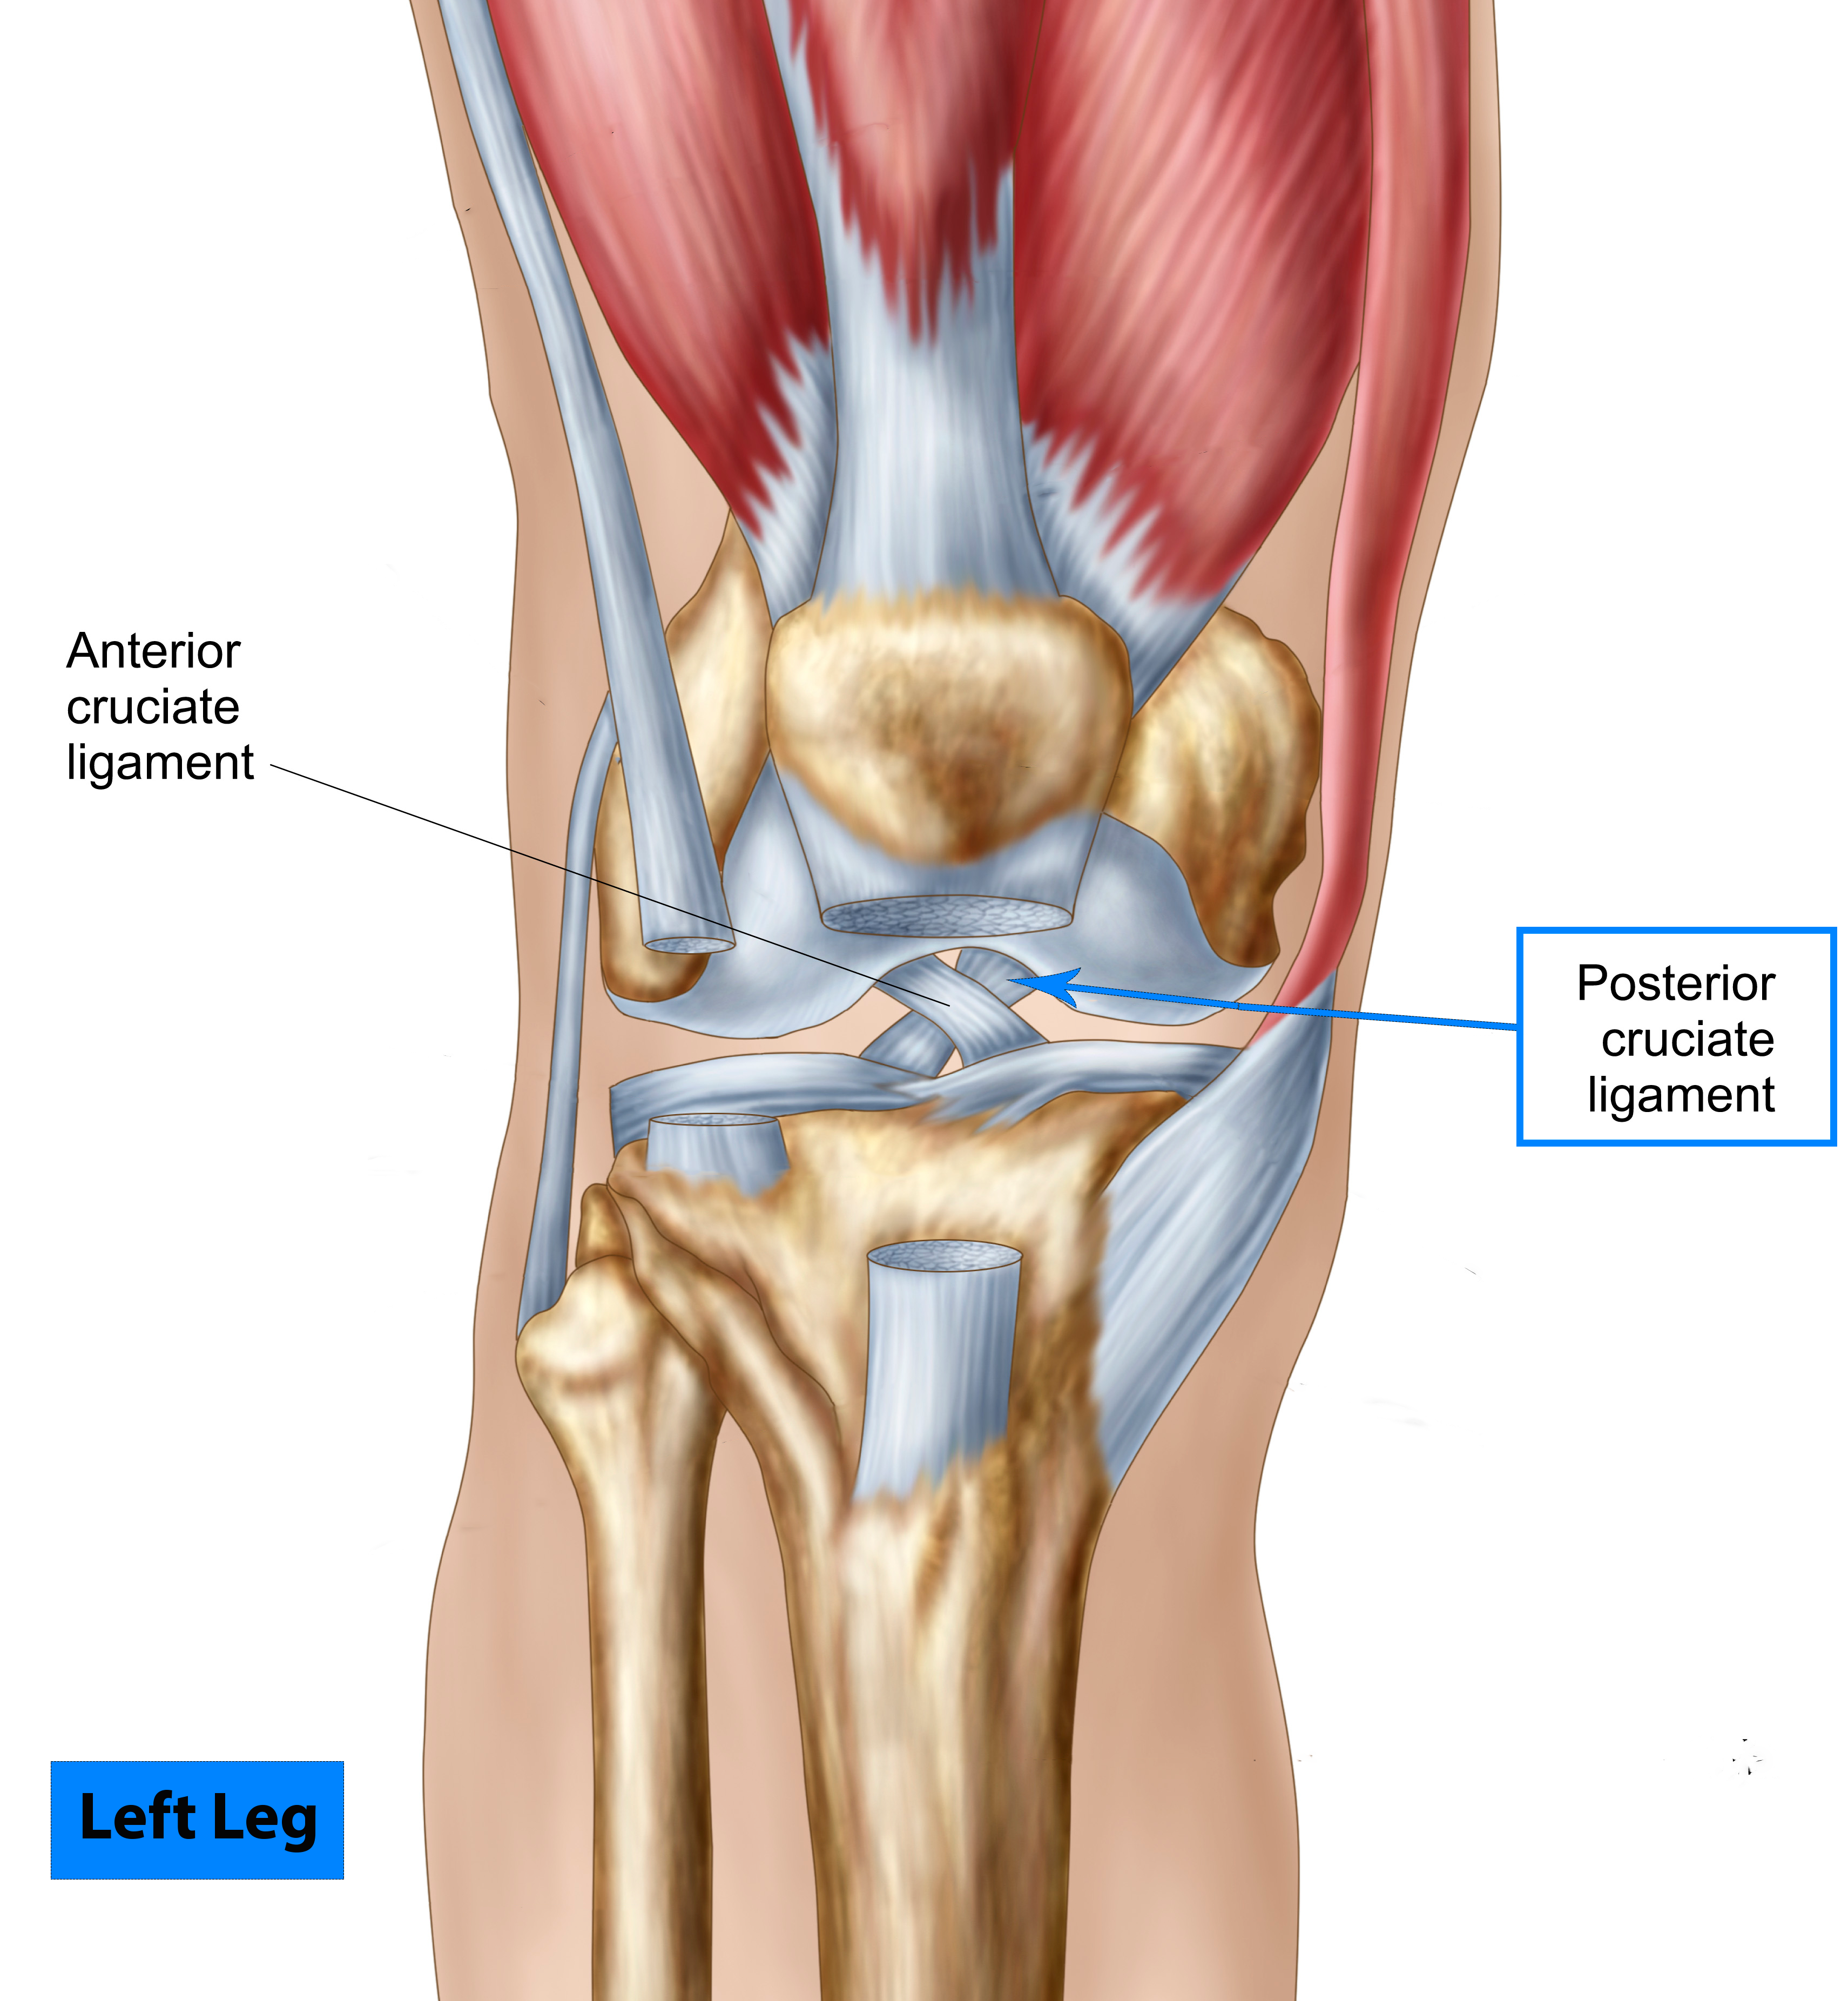 Pcl Injuries What Happens And What Treatment Options Are Available